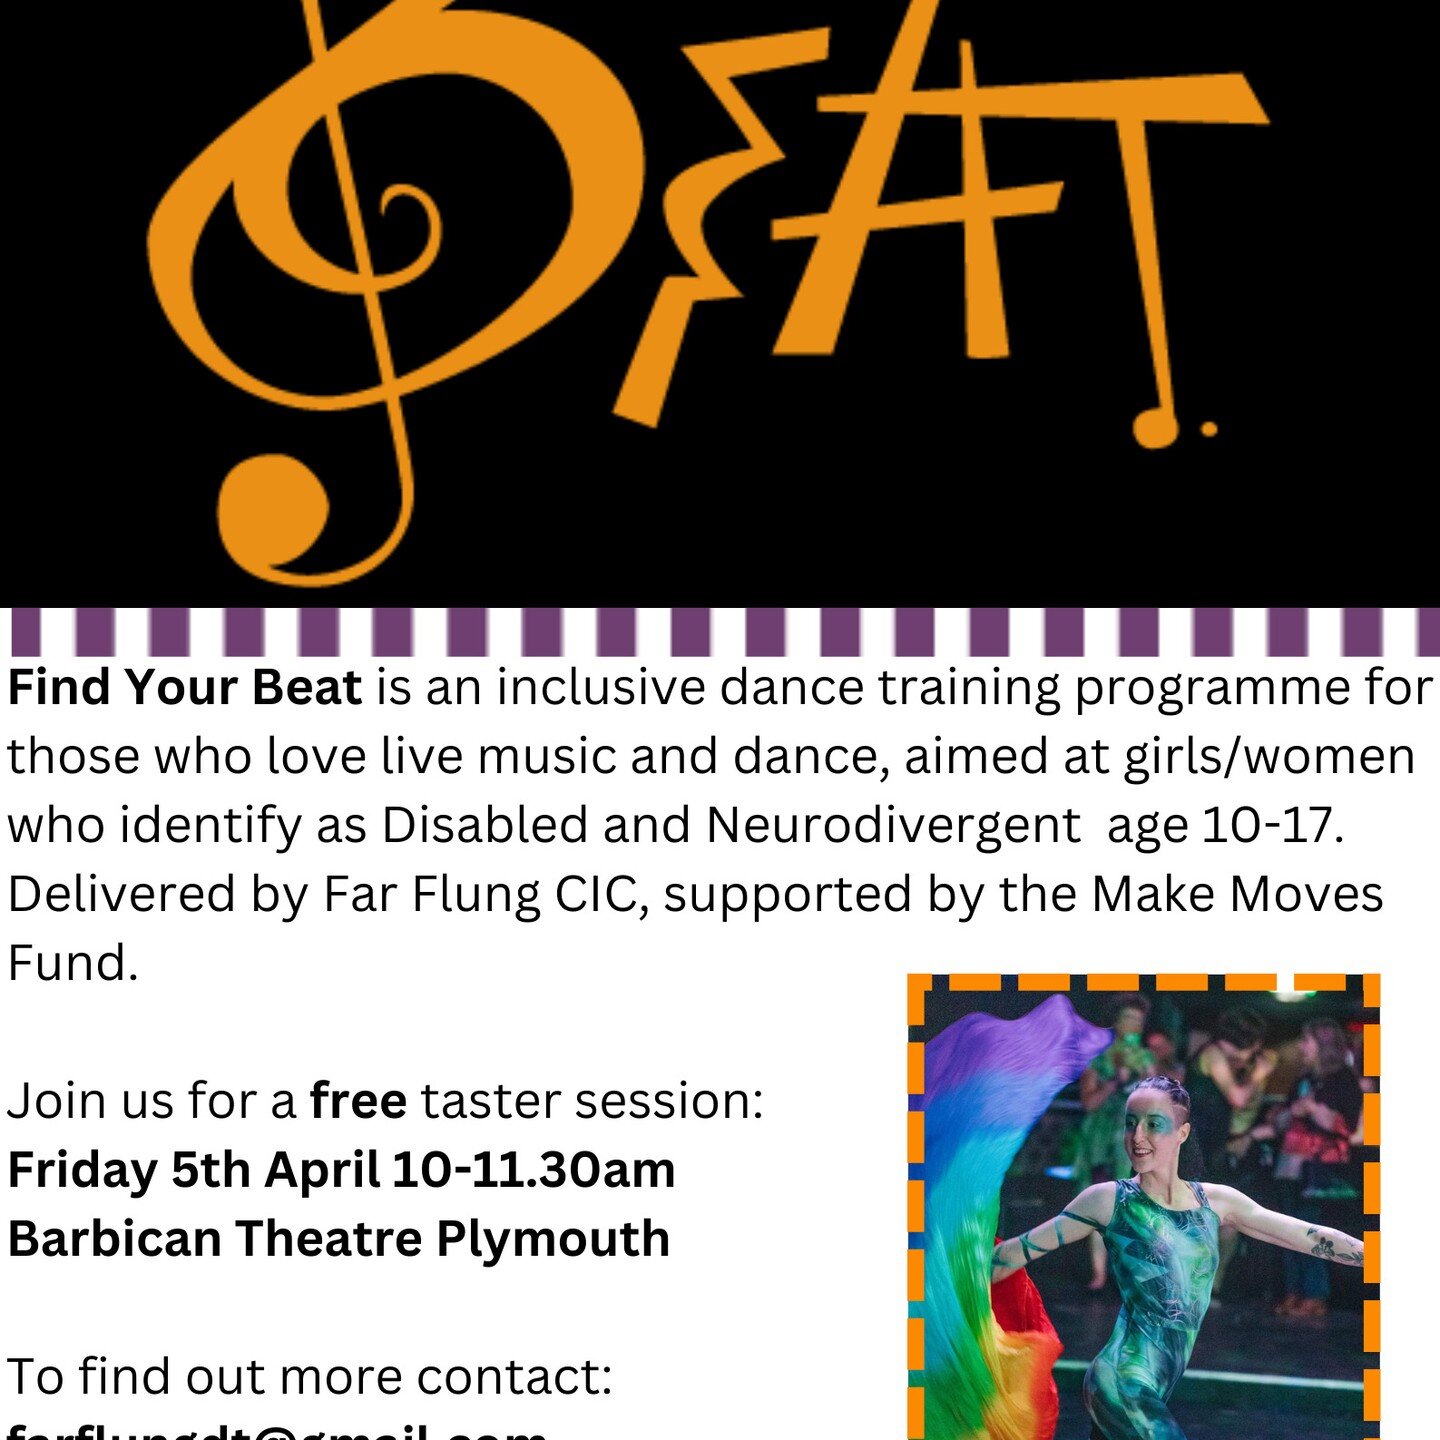 Do you love to dance//live music? If so, join brilliant @farflungc.i.c &lsquo;Find your beat&rsquo; in partnership with The Barbican Theatre Plymouth. an inclusive dance training programme for Disabled/Neurodivergent girls/women! free taster session 